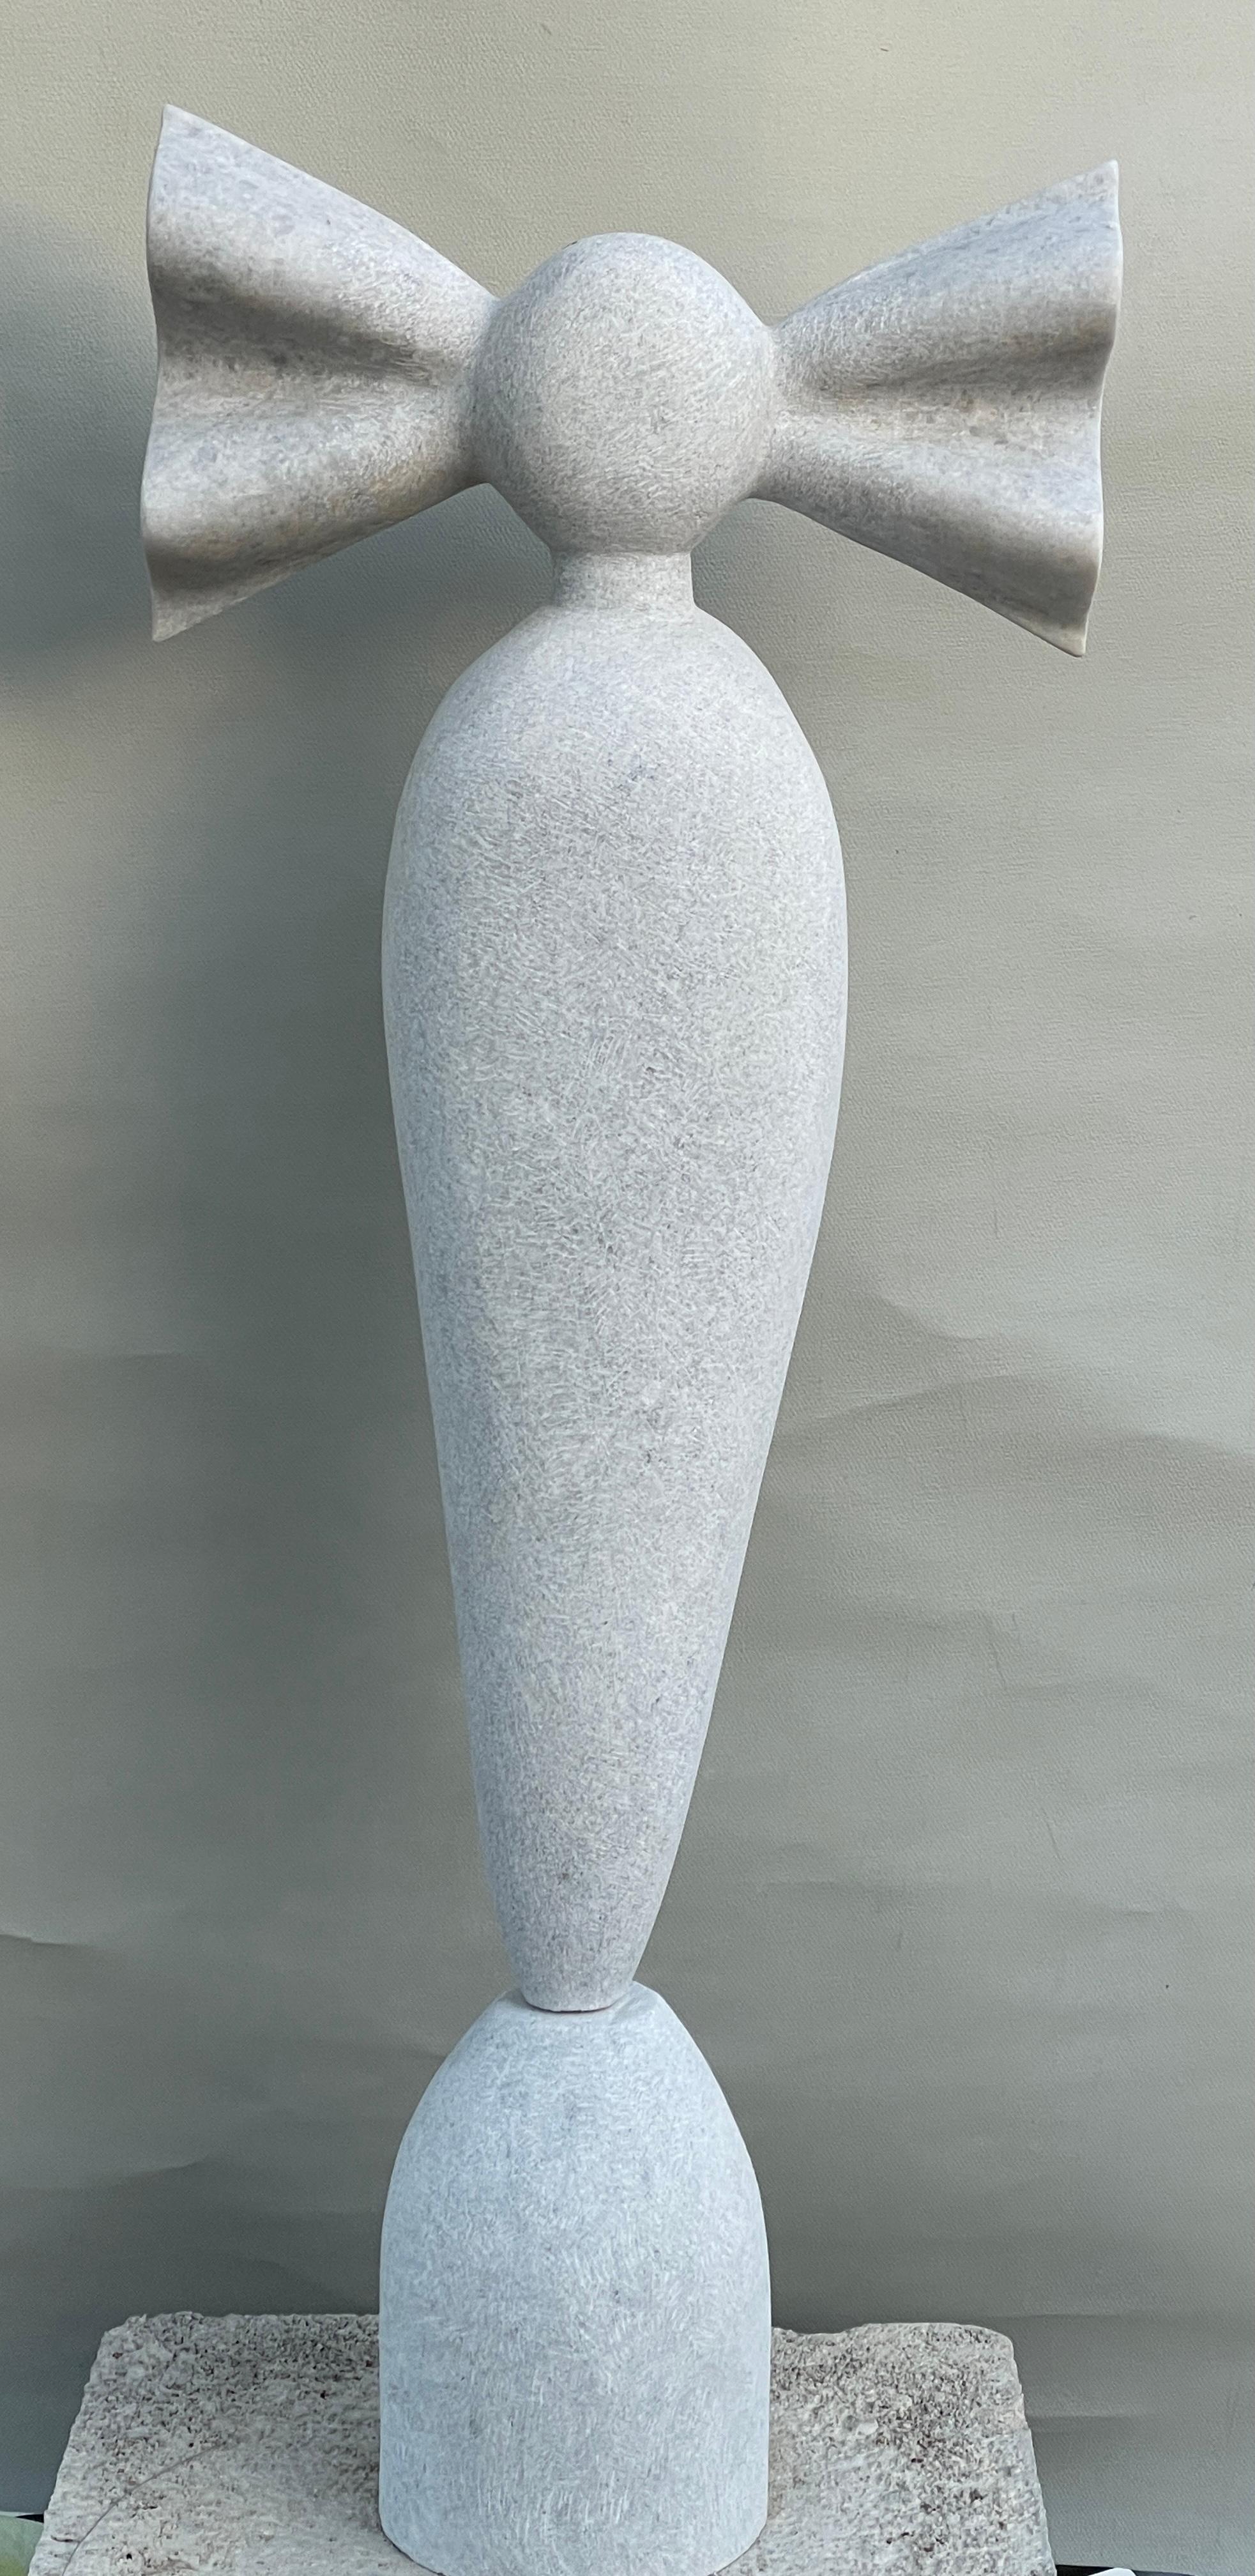 Nike hand carved marble sculpture by Tom Von Kaenel.
Dimensions: D 17 x W 41 x H 106 cm.
Materials: marble.

Tom von Kaenel, sculptor and painter, was born in Switzerland in 1961. Already in his early childhood he was deeply devoted to art. His